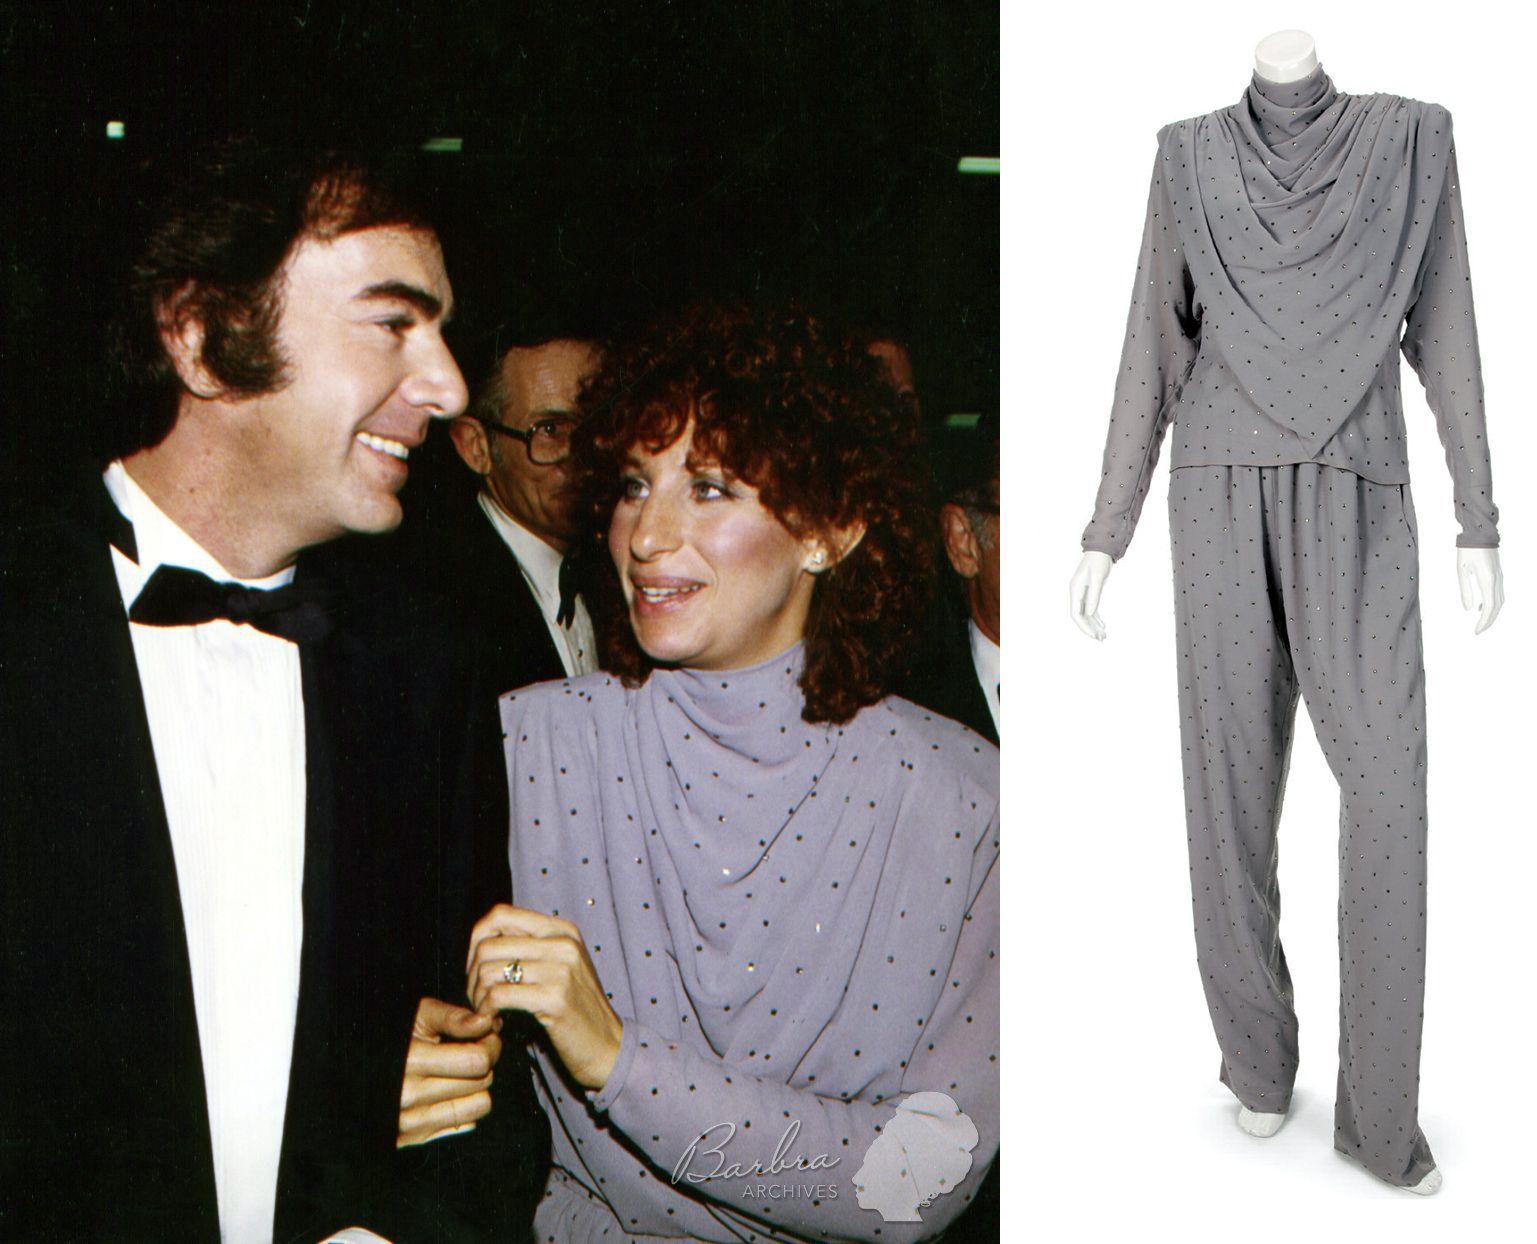 Streisand's jumpsuit that she wore on this program.